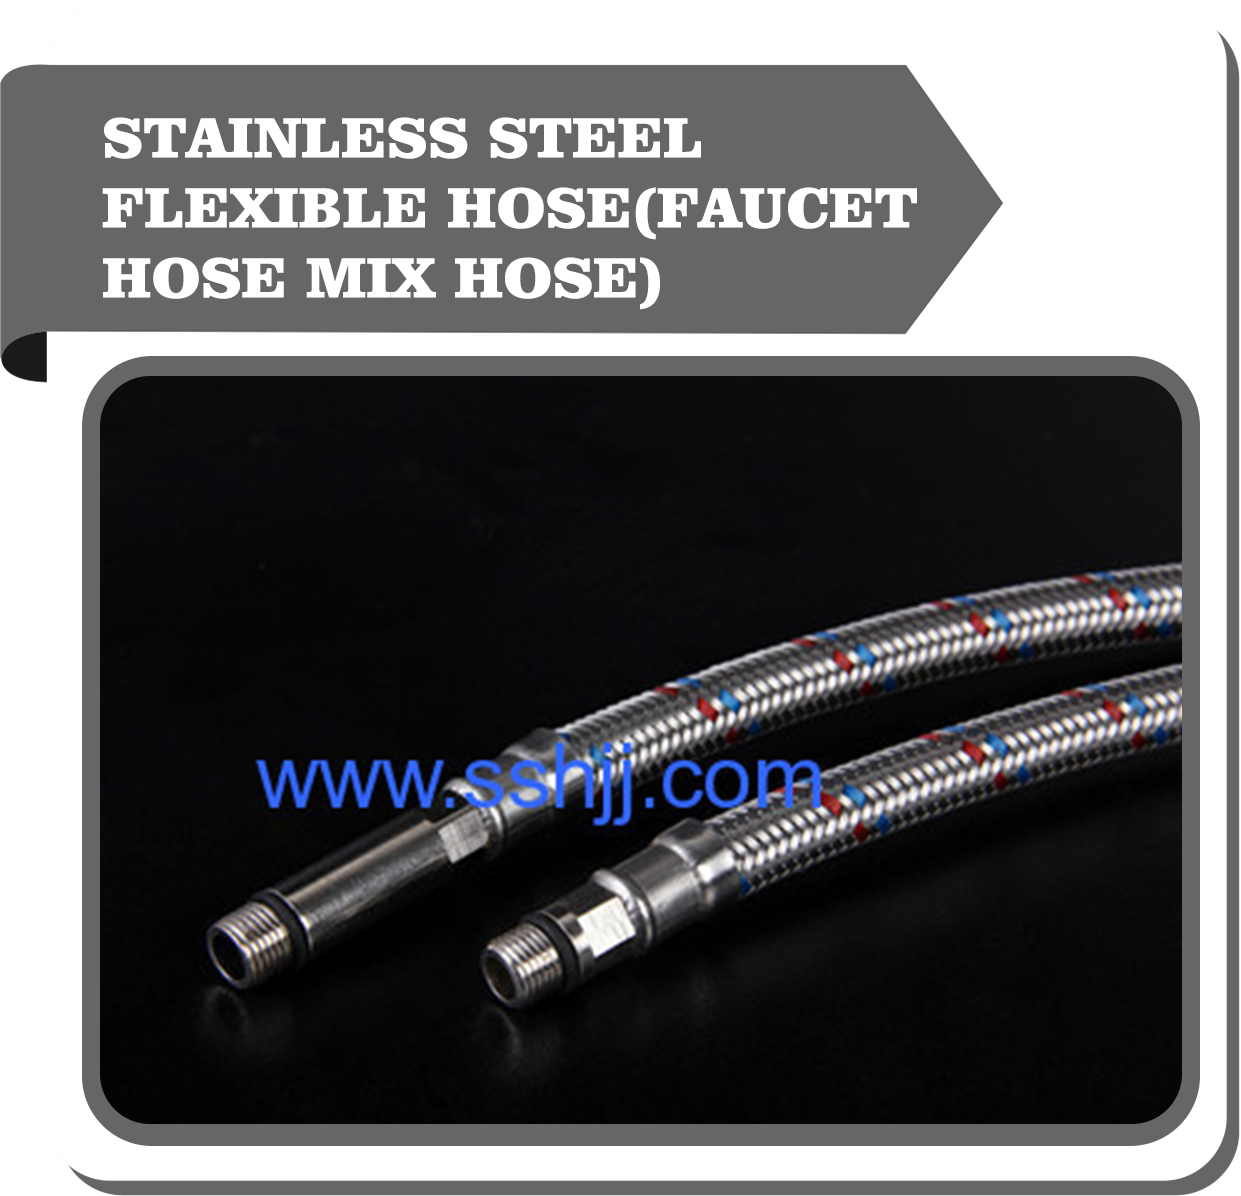 Stainless steel braided hose(faucet hose mix hose